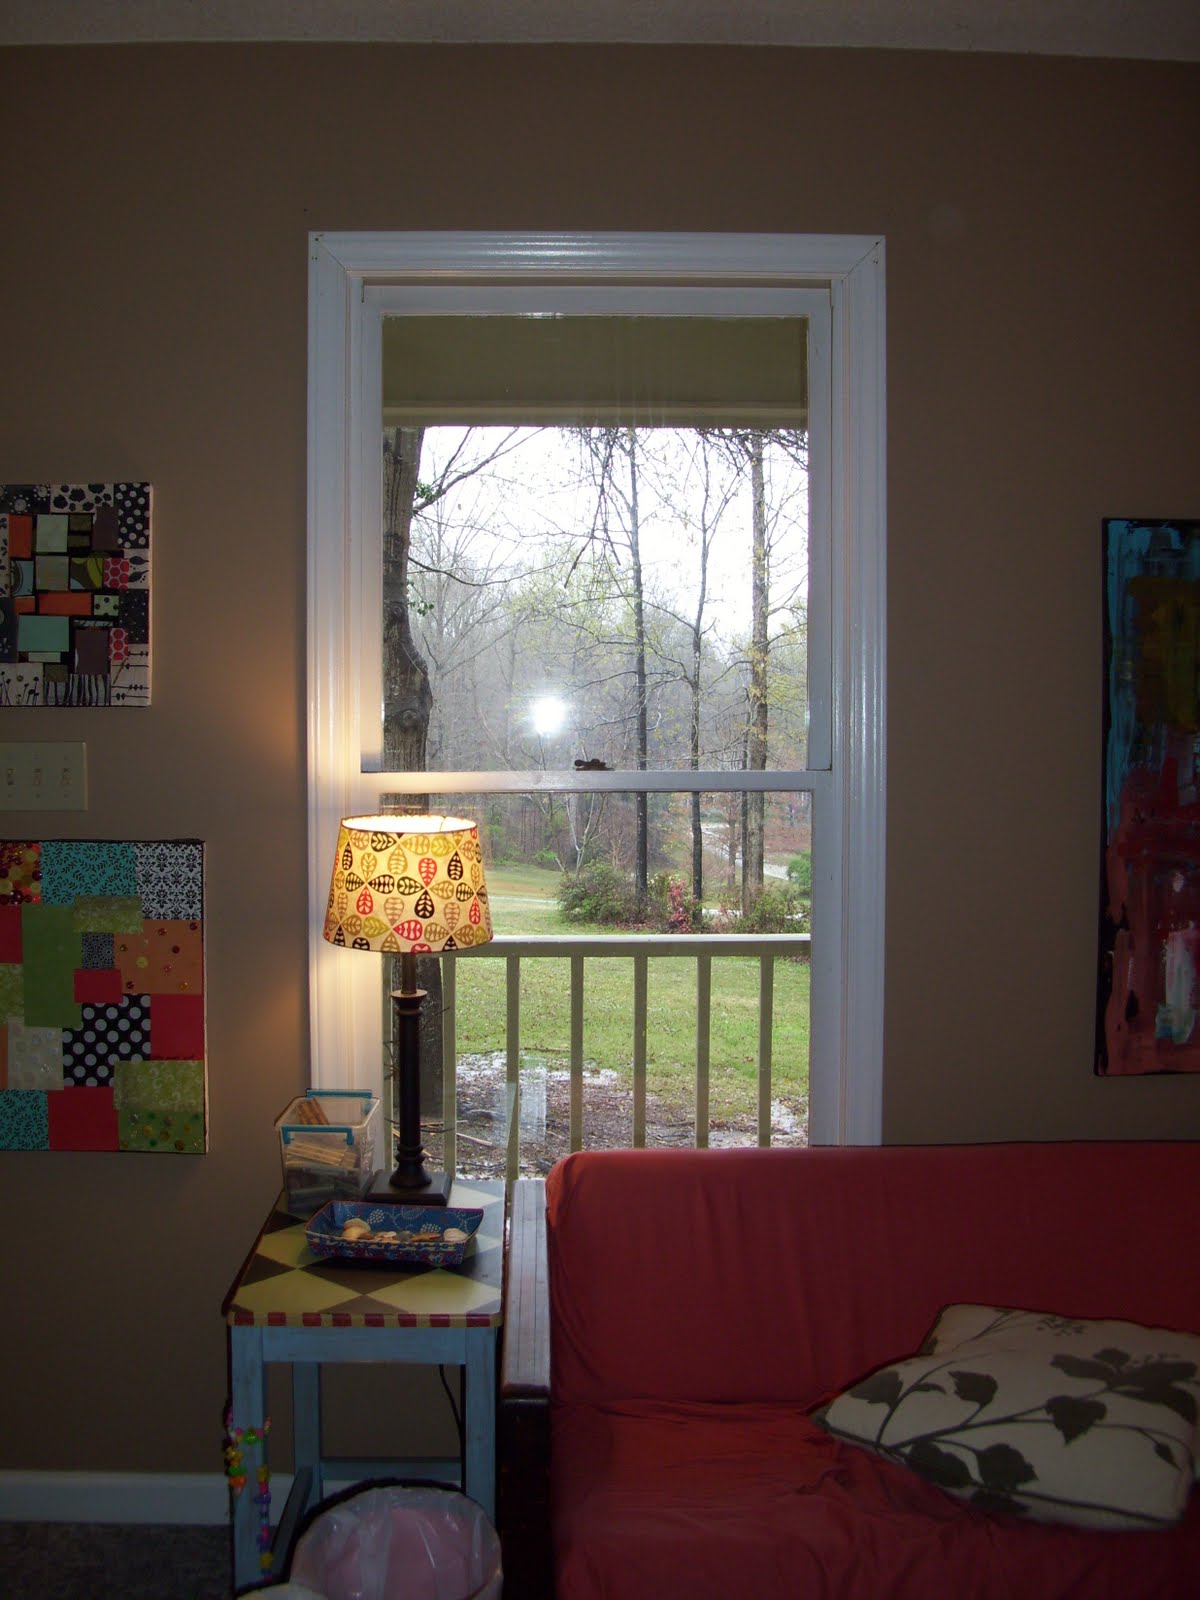 Sara's art* house surprise window makeover day!